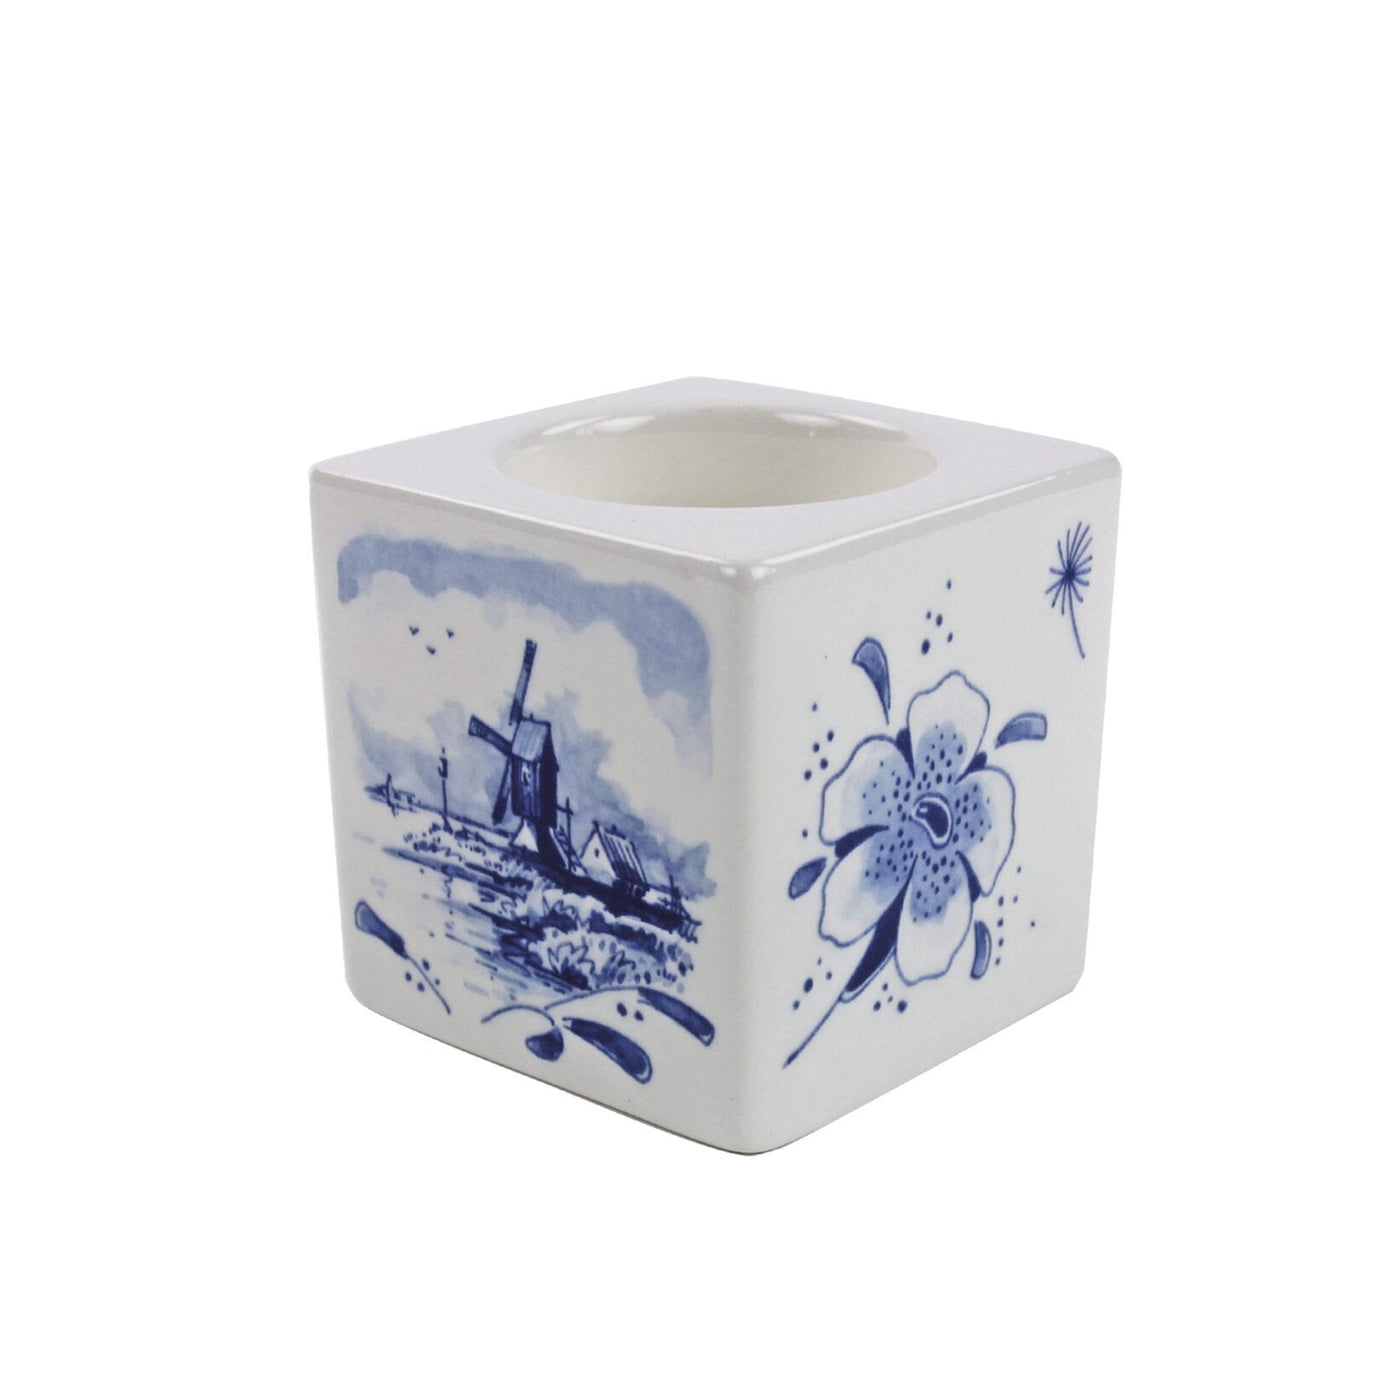 Tealight Candle Holder Cube Windmill Flower by Royal Delft